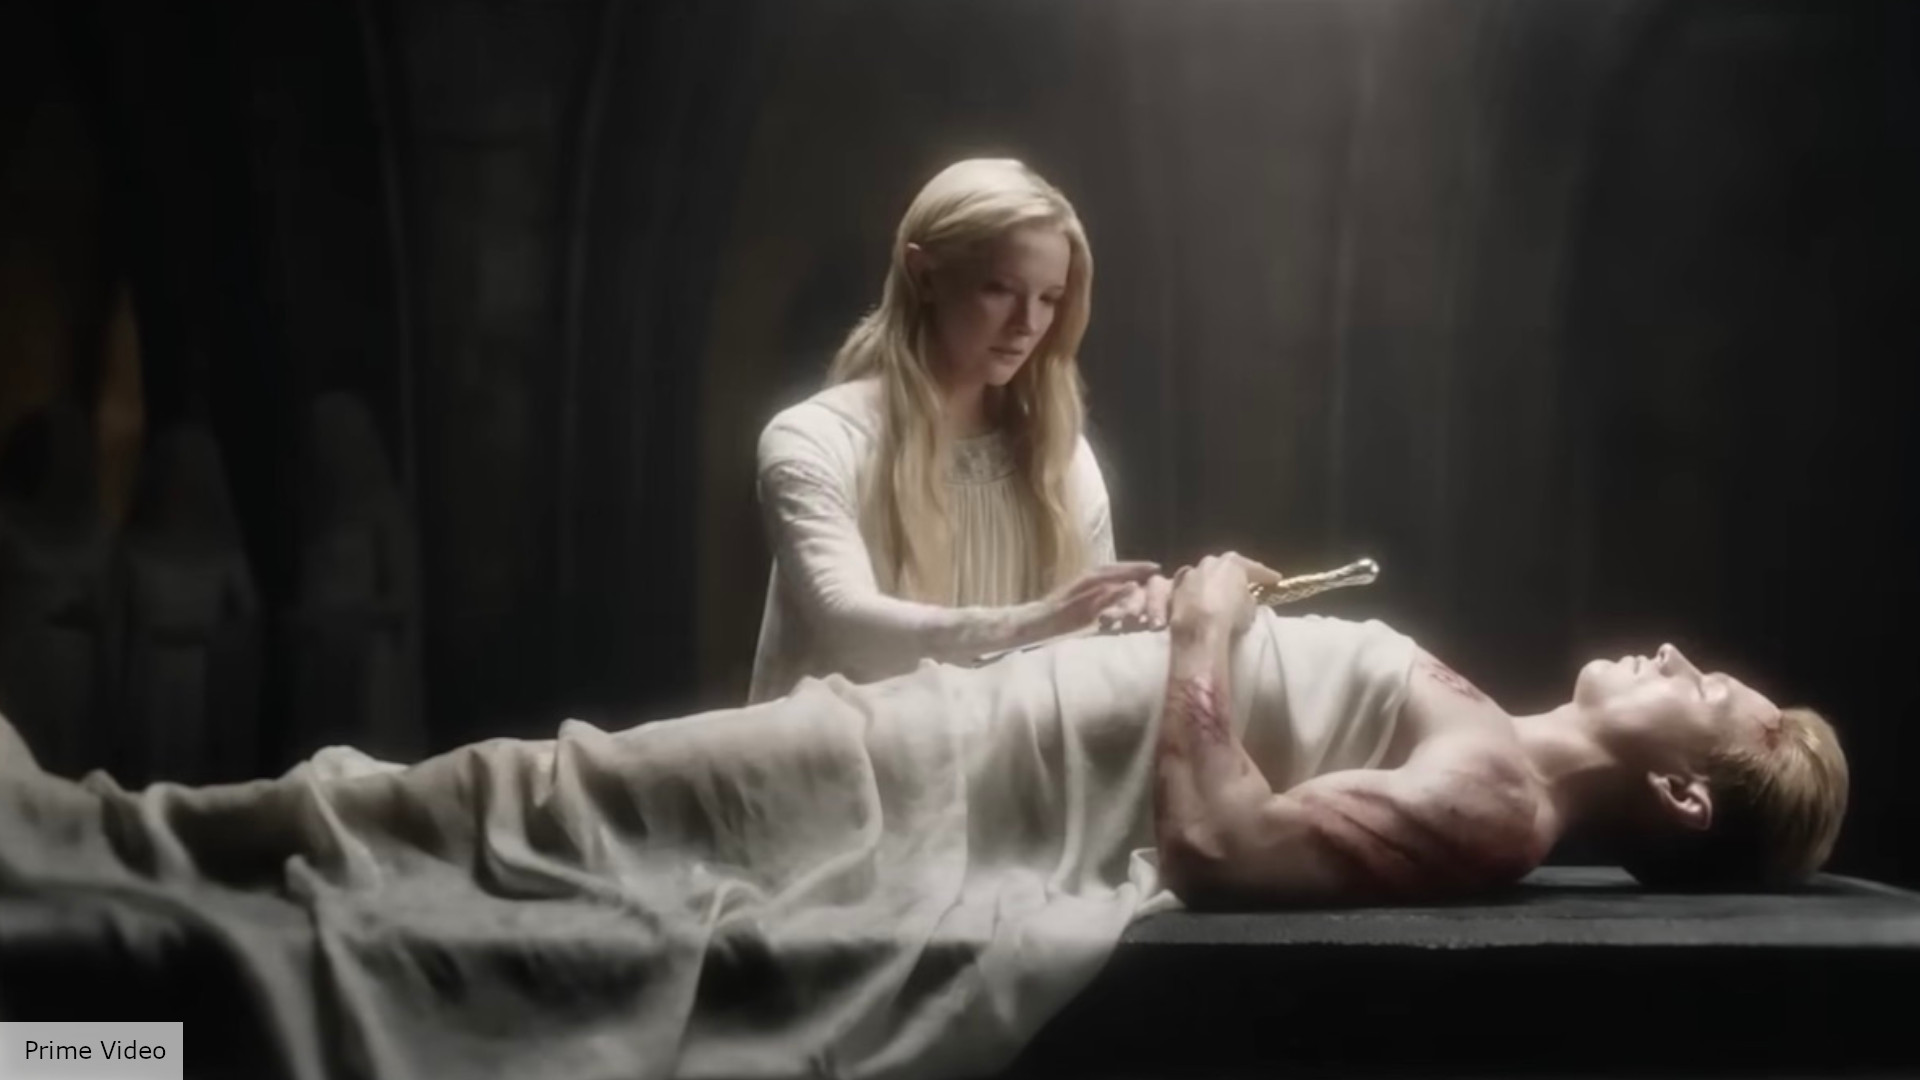 Does anyone else see Aelin as Galadriel from the Rings of Power series now?  I just watched the finale and I can't get it out of my head. I think she'd  be